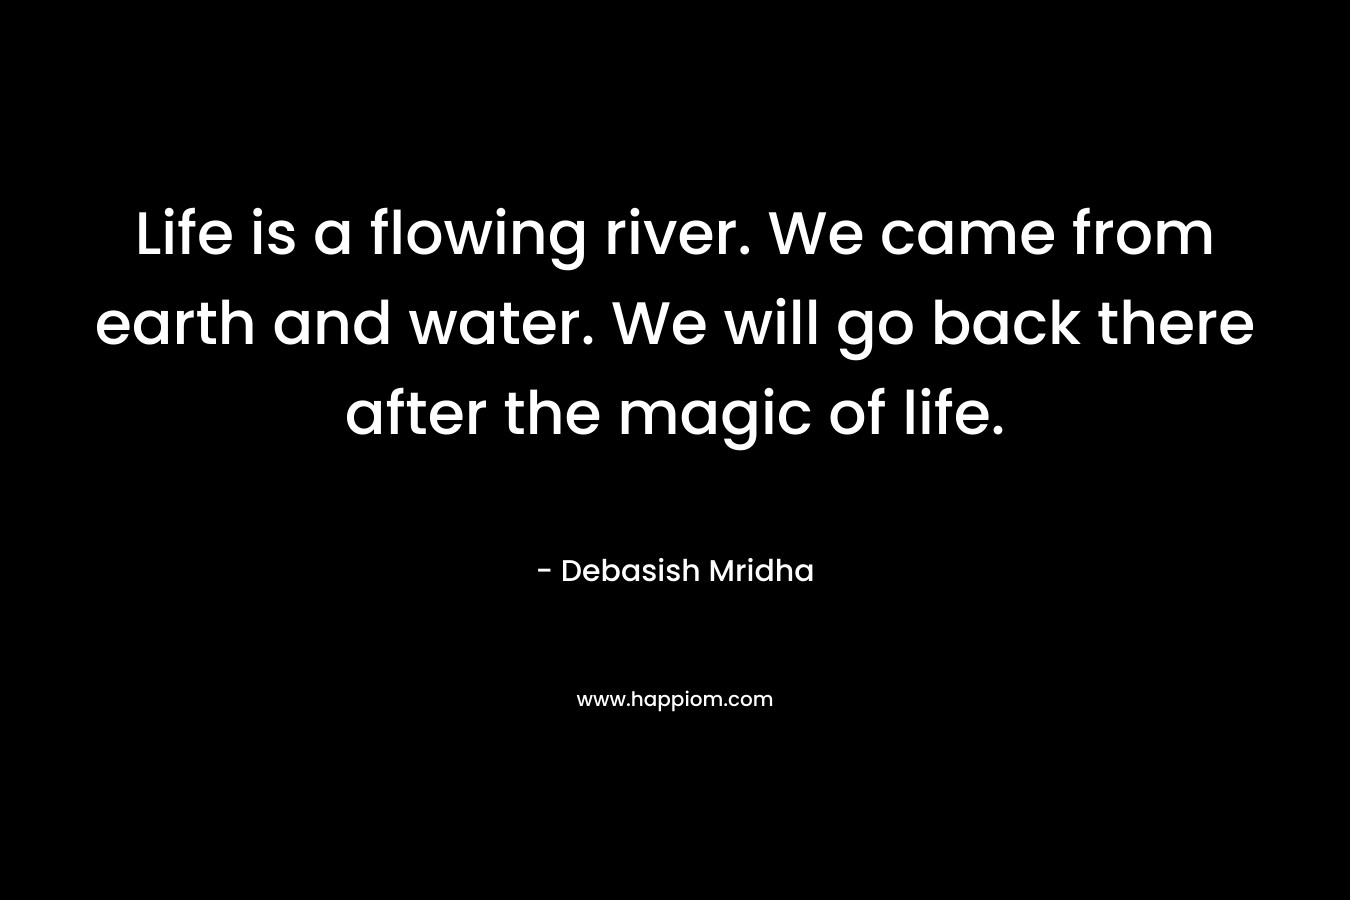 Life is a flowing river. We came from earth and water. We will go back there after the magic of life.